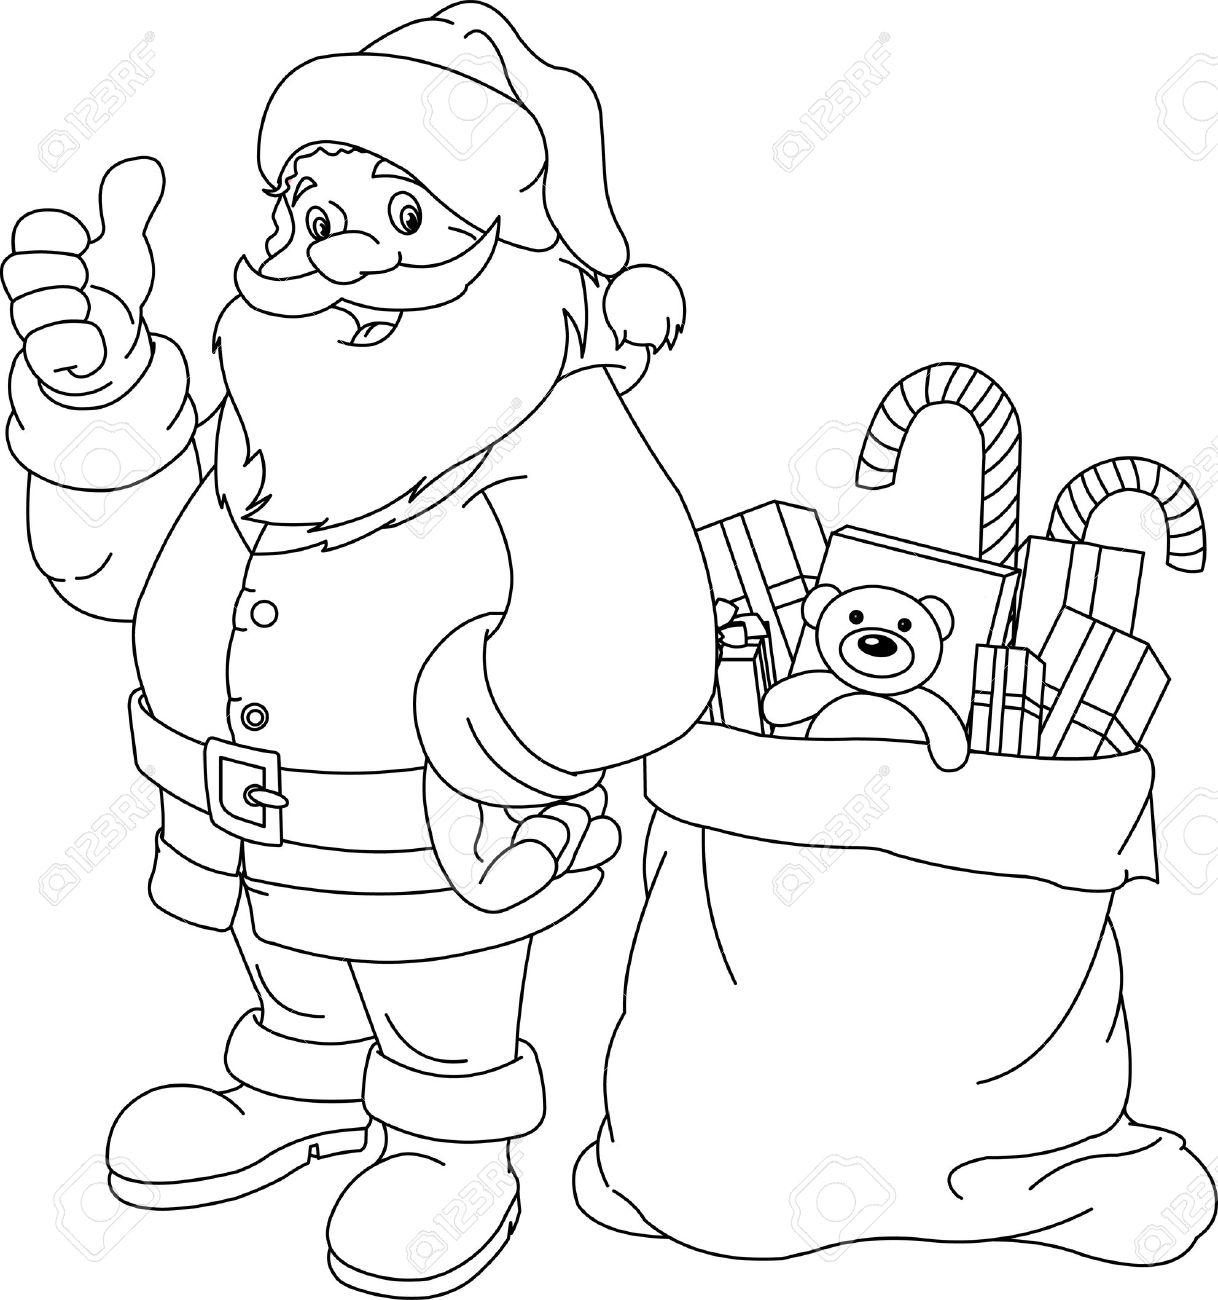 Santa claus coloring pages to download and print for free